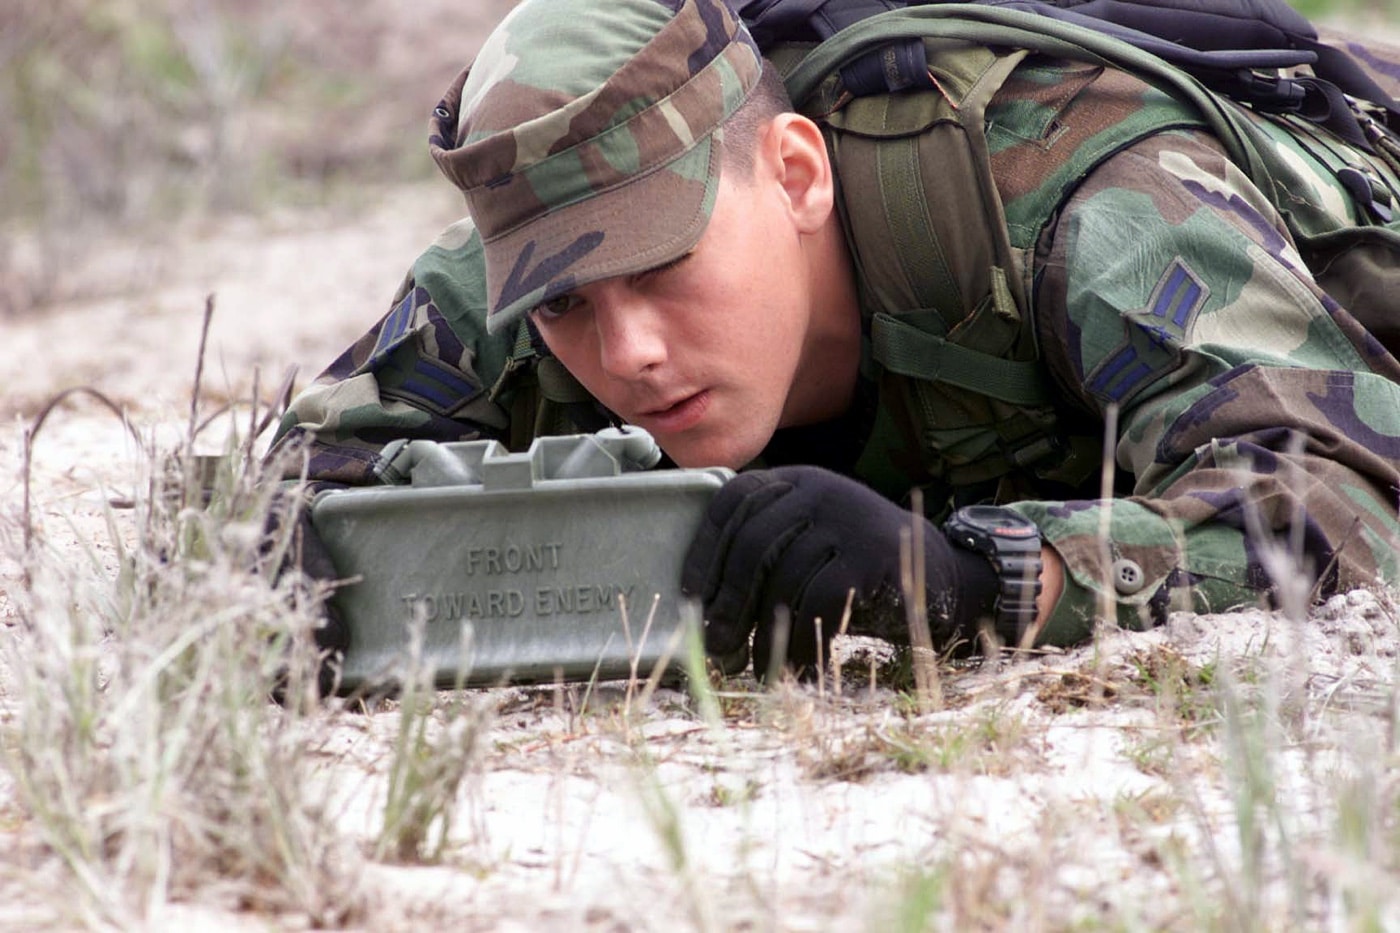 aligning a claymore mine during training